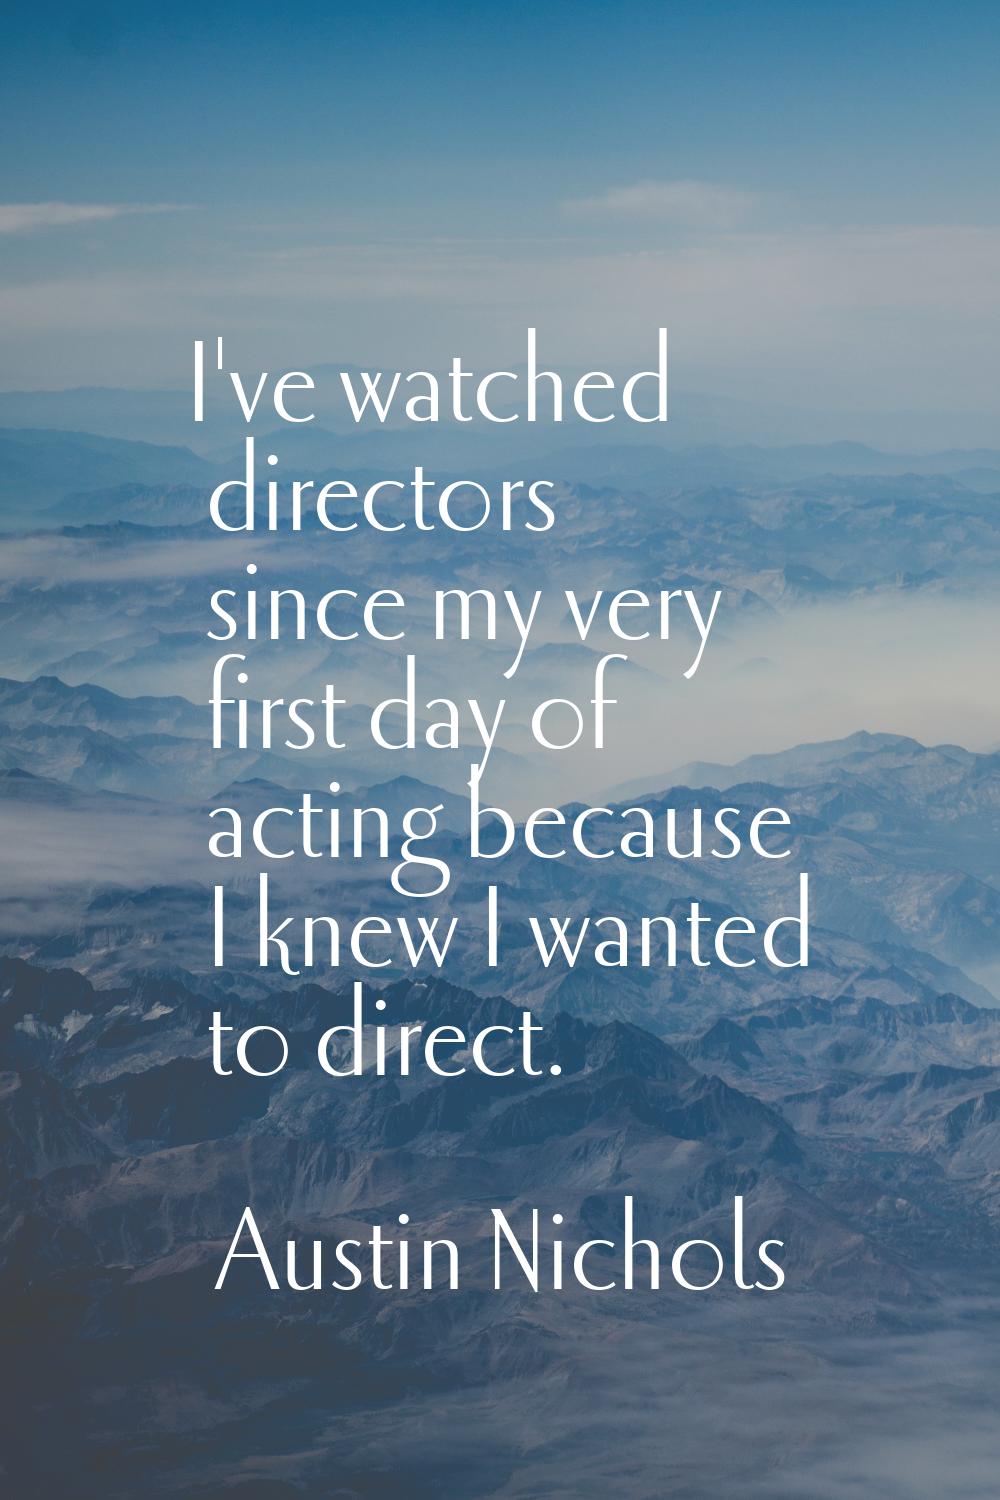 I've watched directors since my very first day of acting because I knew I wanted to direct.